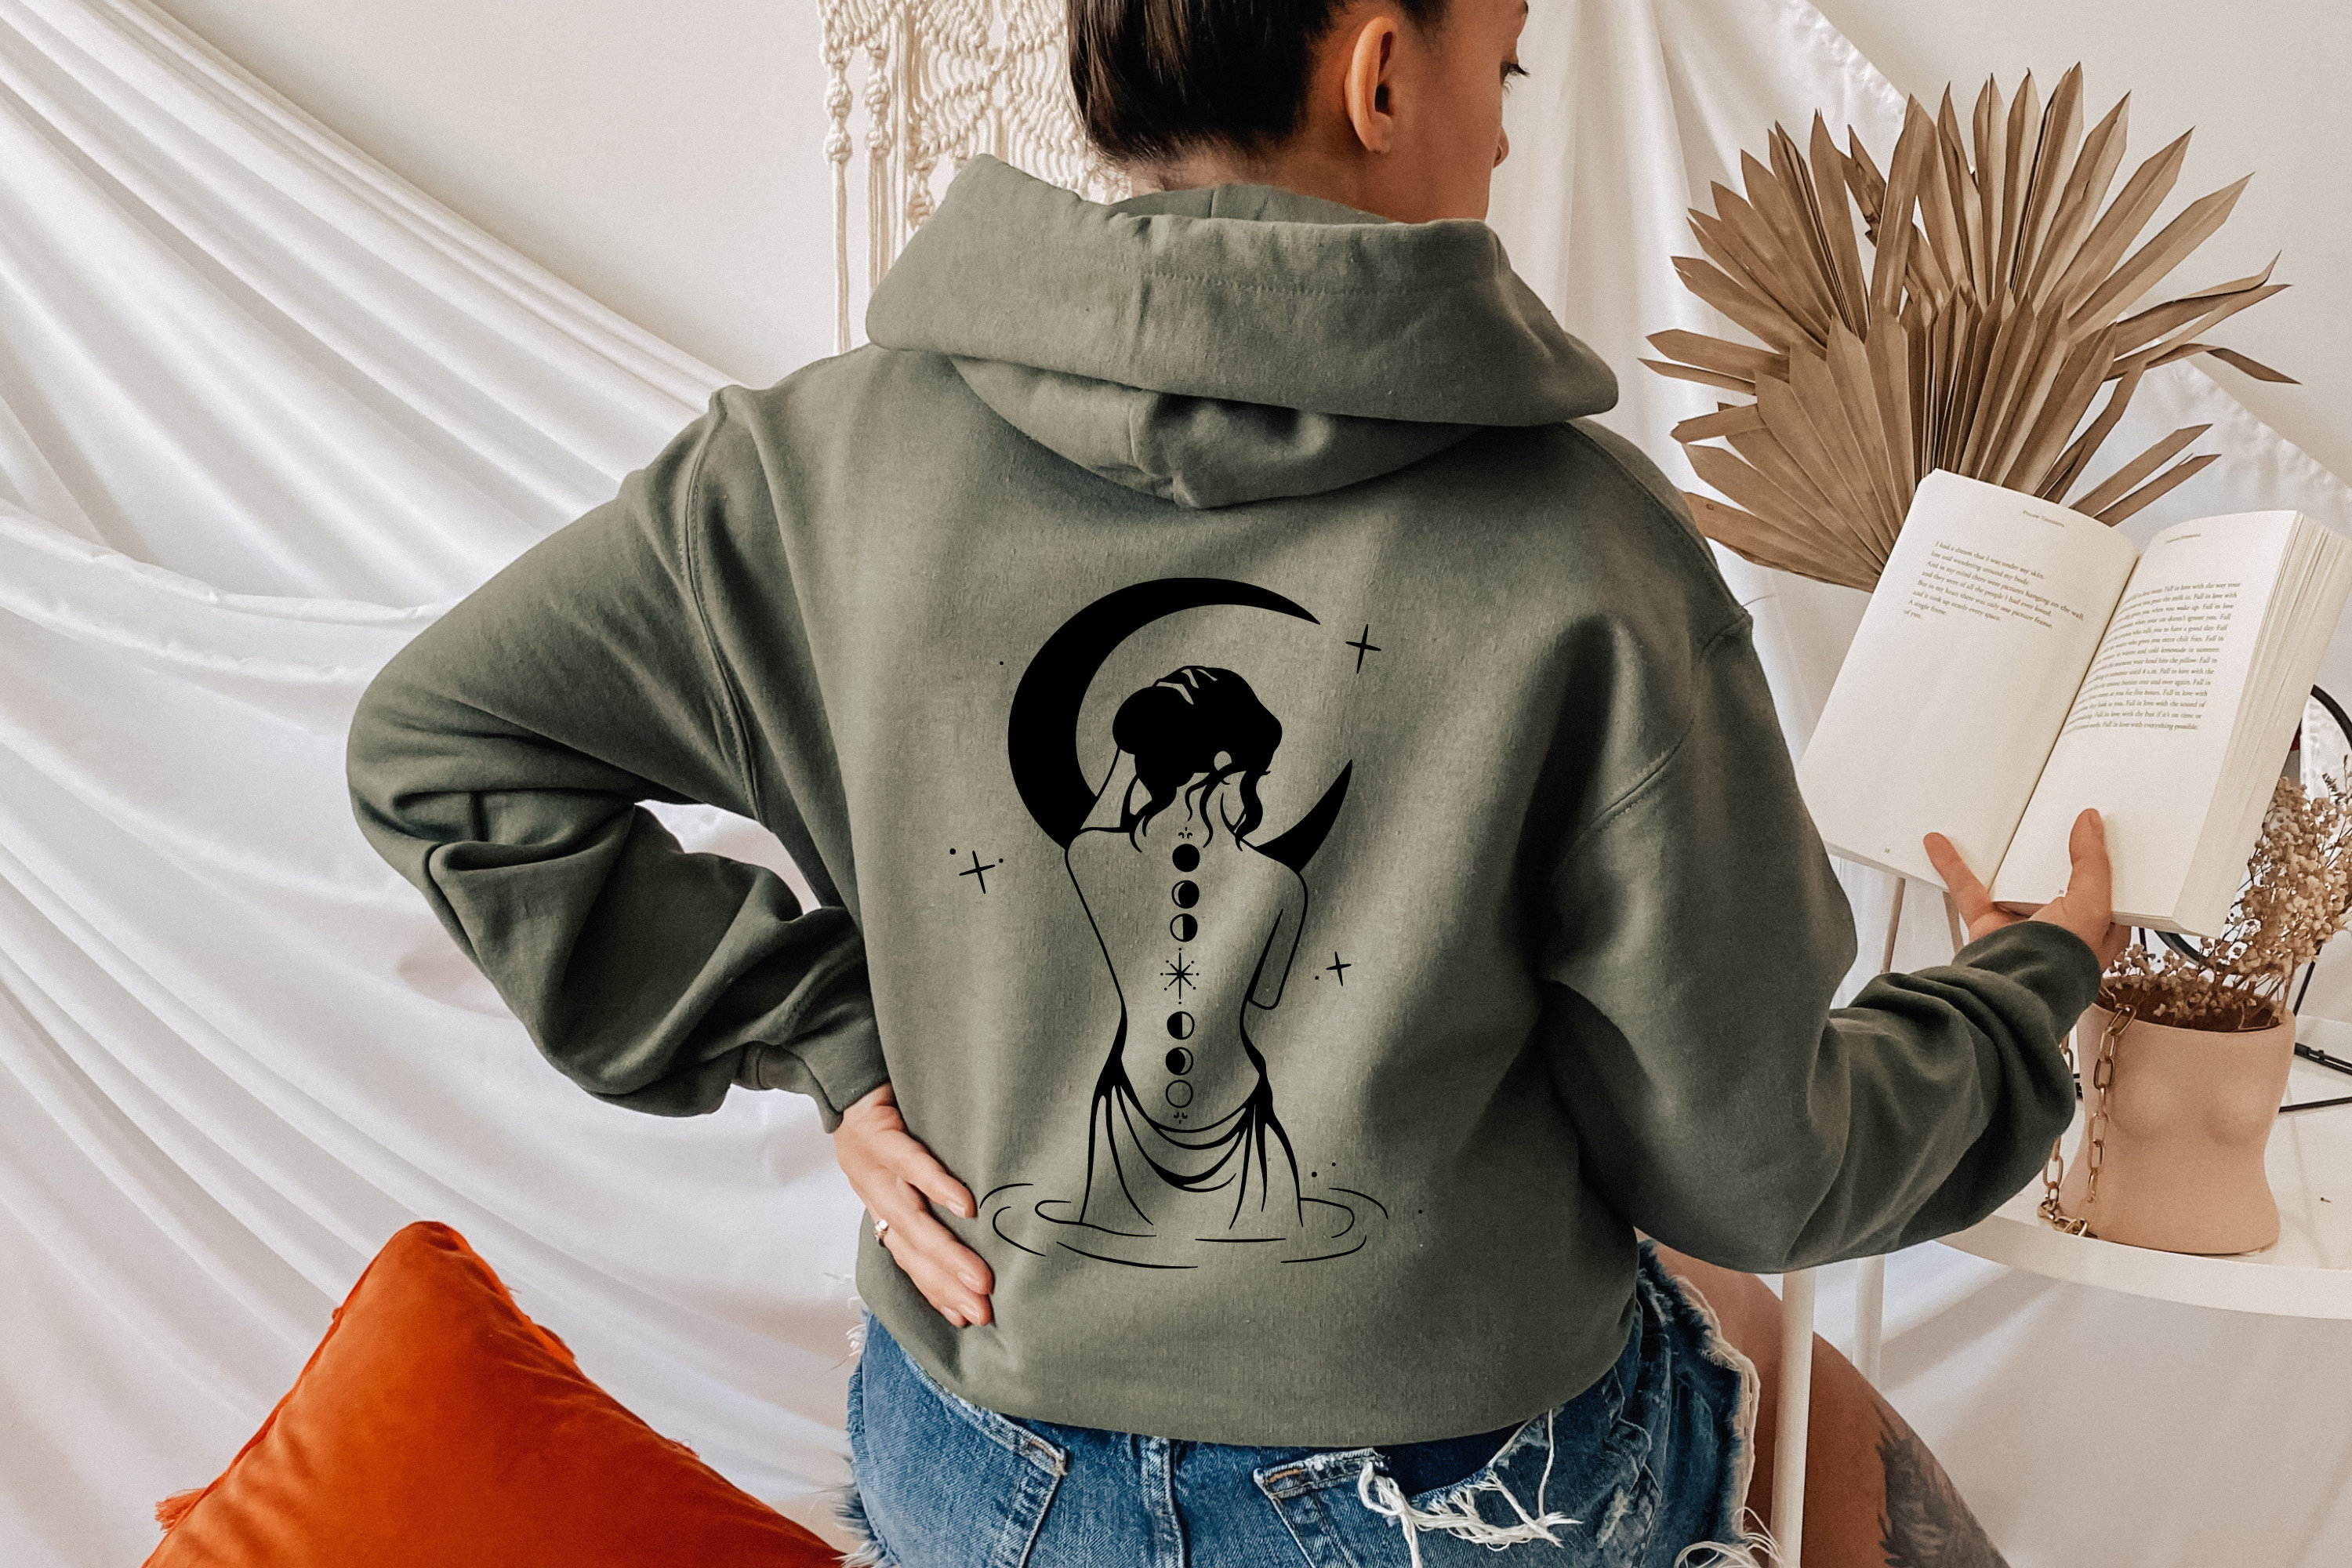  Queen Another one Bites the Dust Pullover Hoodie : Clothing,  Shoes & Jewelry